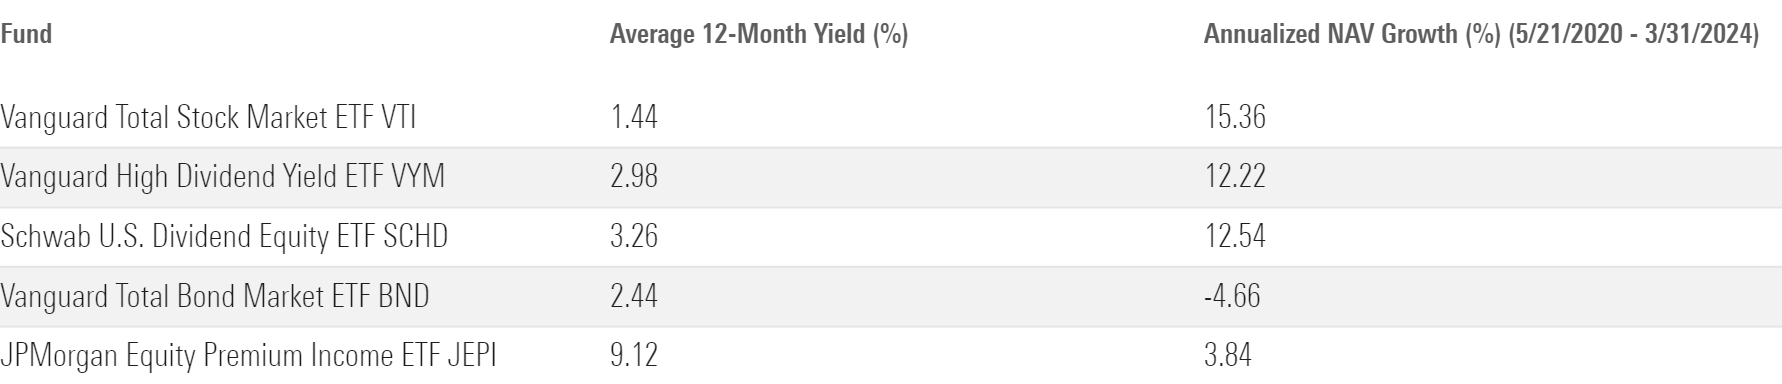 JPMorgan Equity Premium Income ETF JEPI has provided a higher average yield than high-yield dividend ETFs, but its net asset value has grown at a much lower annualized rate.